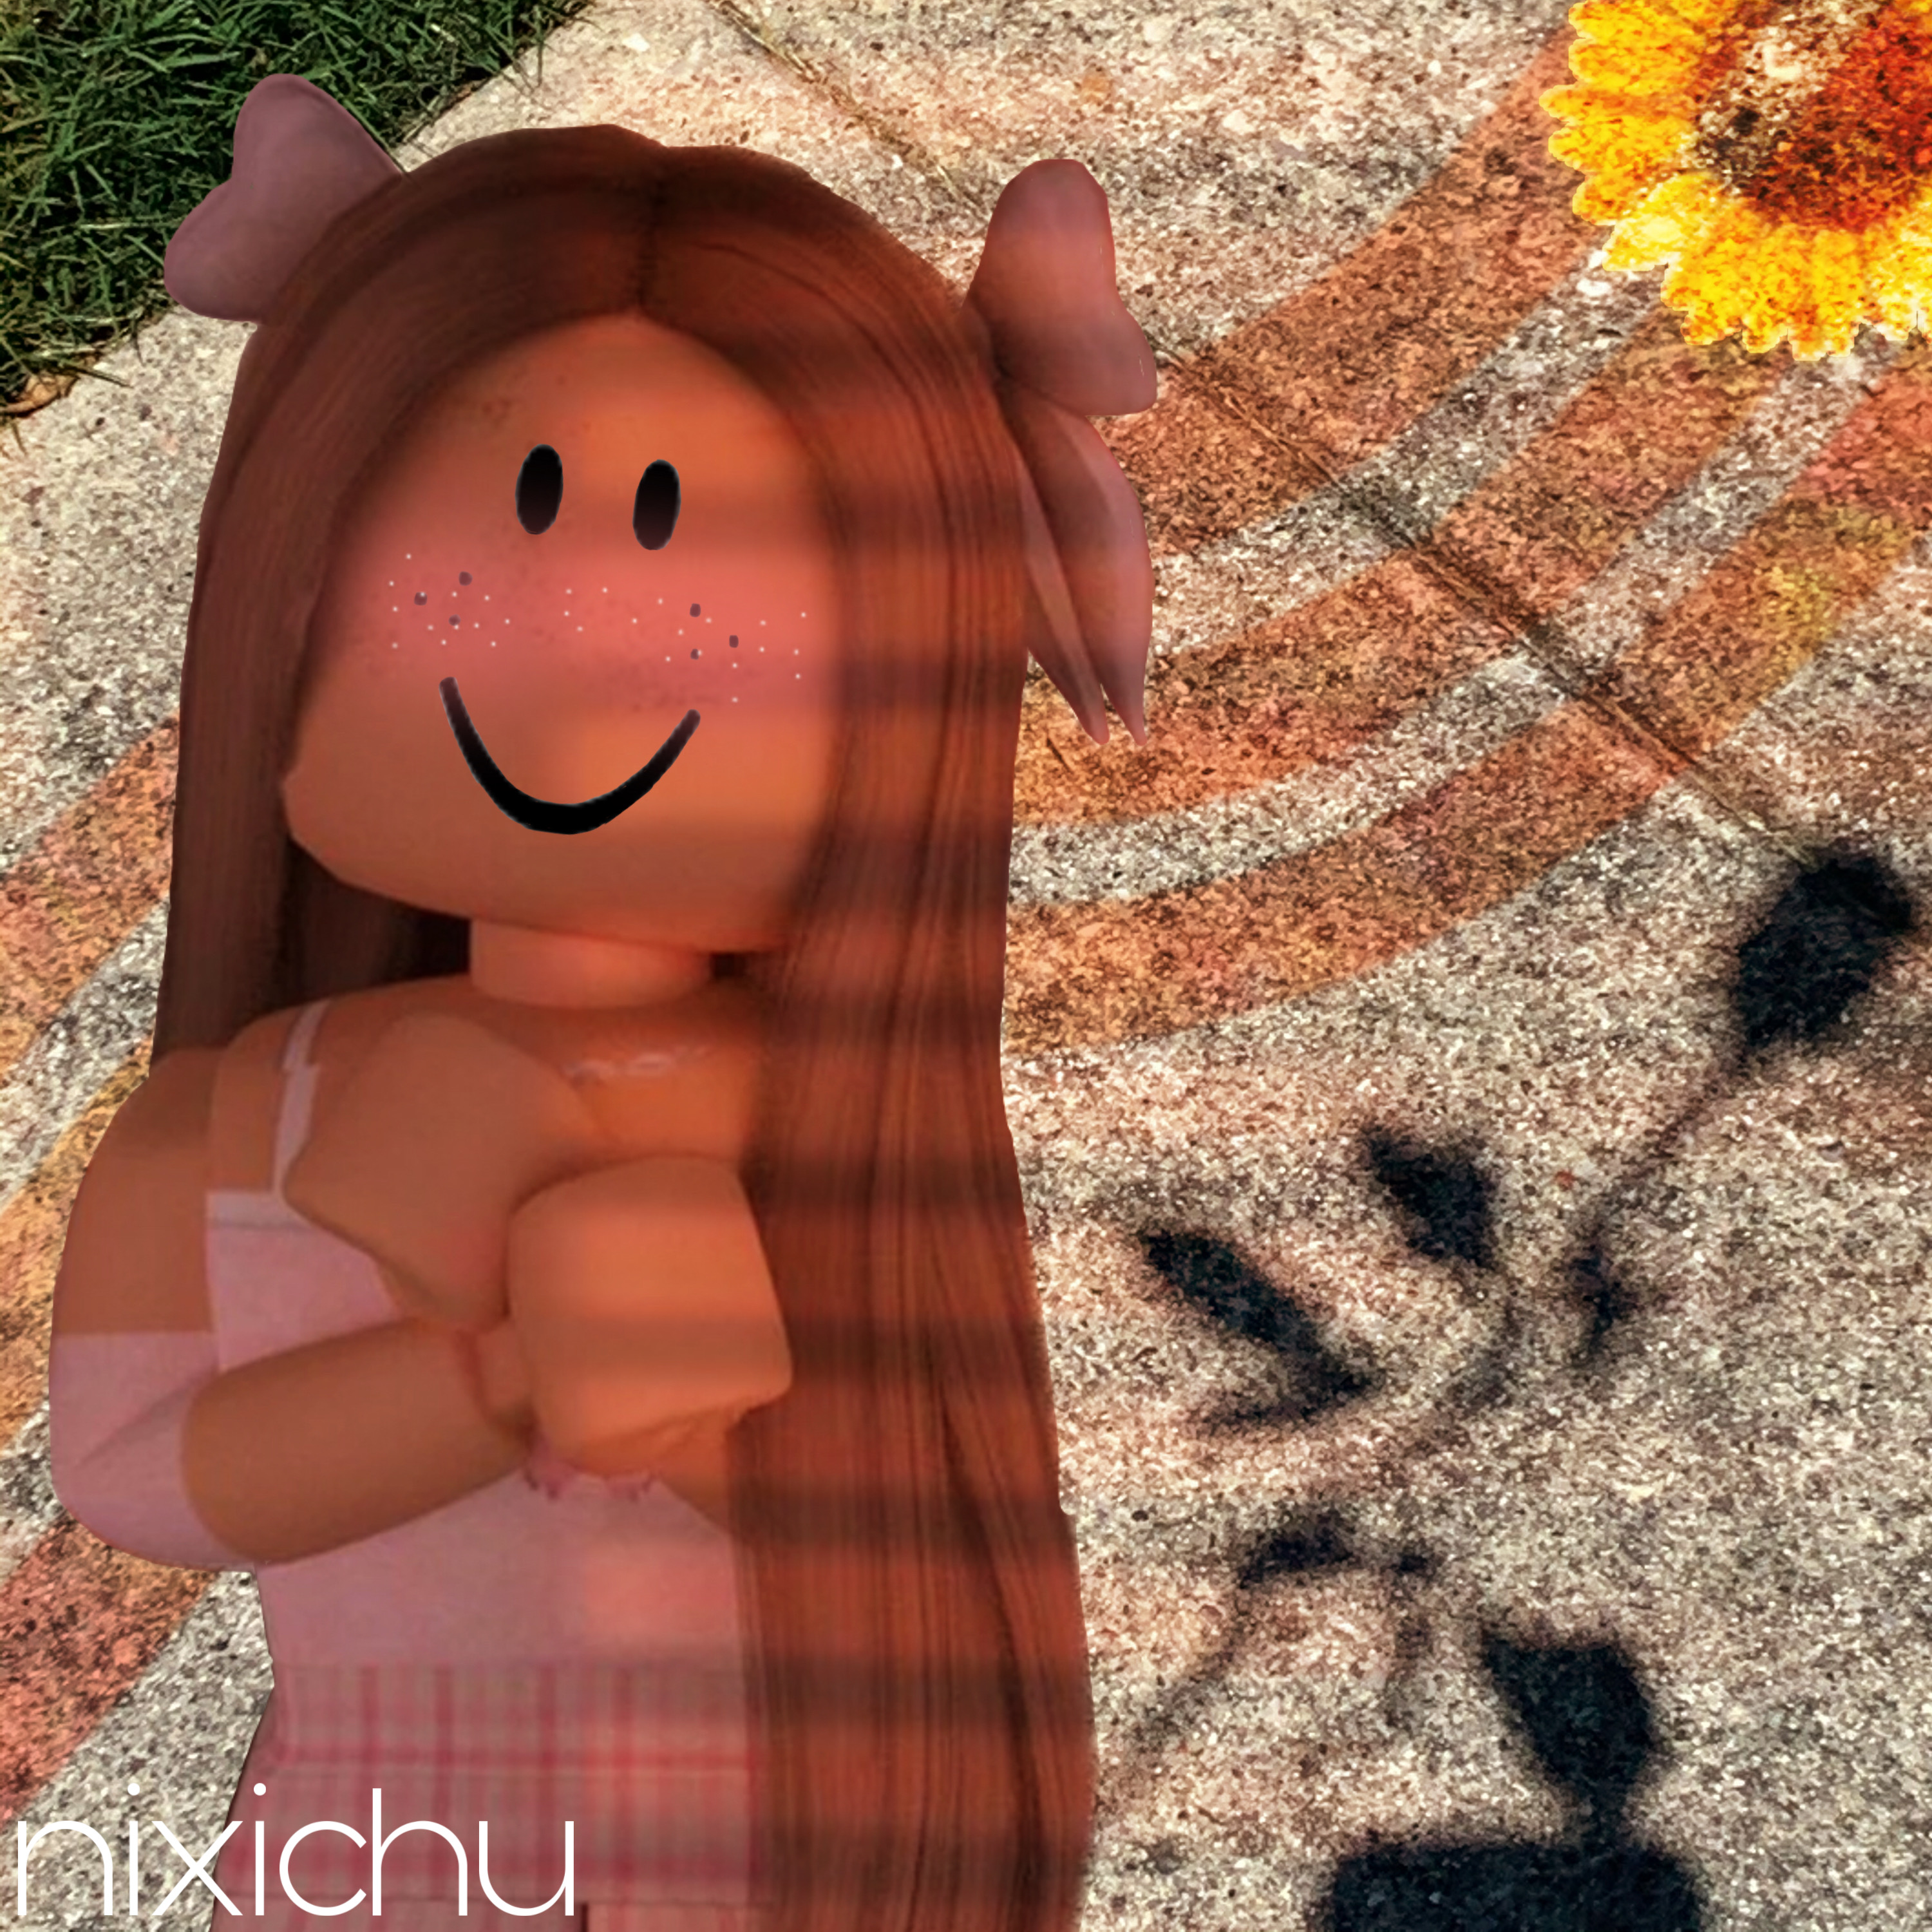 Robloxgfx Girl Robloxgirl Rblx Cute Image By Nixichu - cute roblox gfx sunflower aesthetic roblox profile pictures